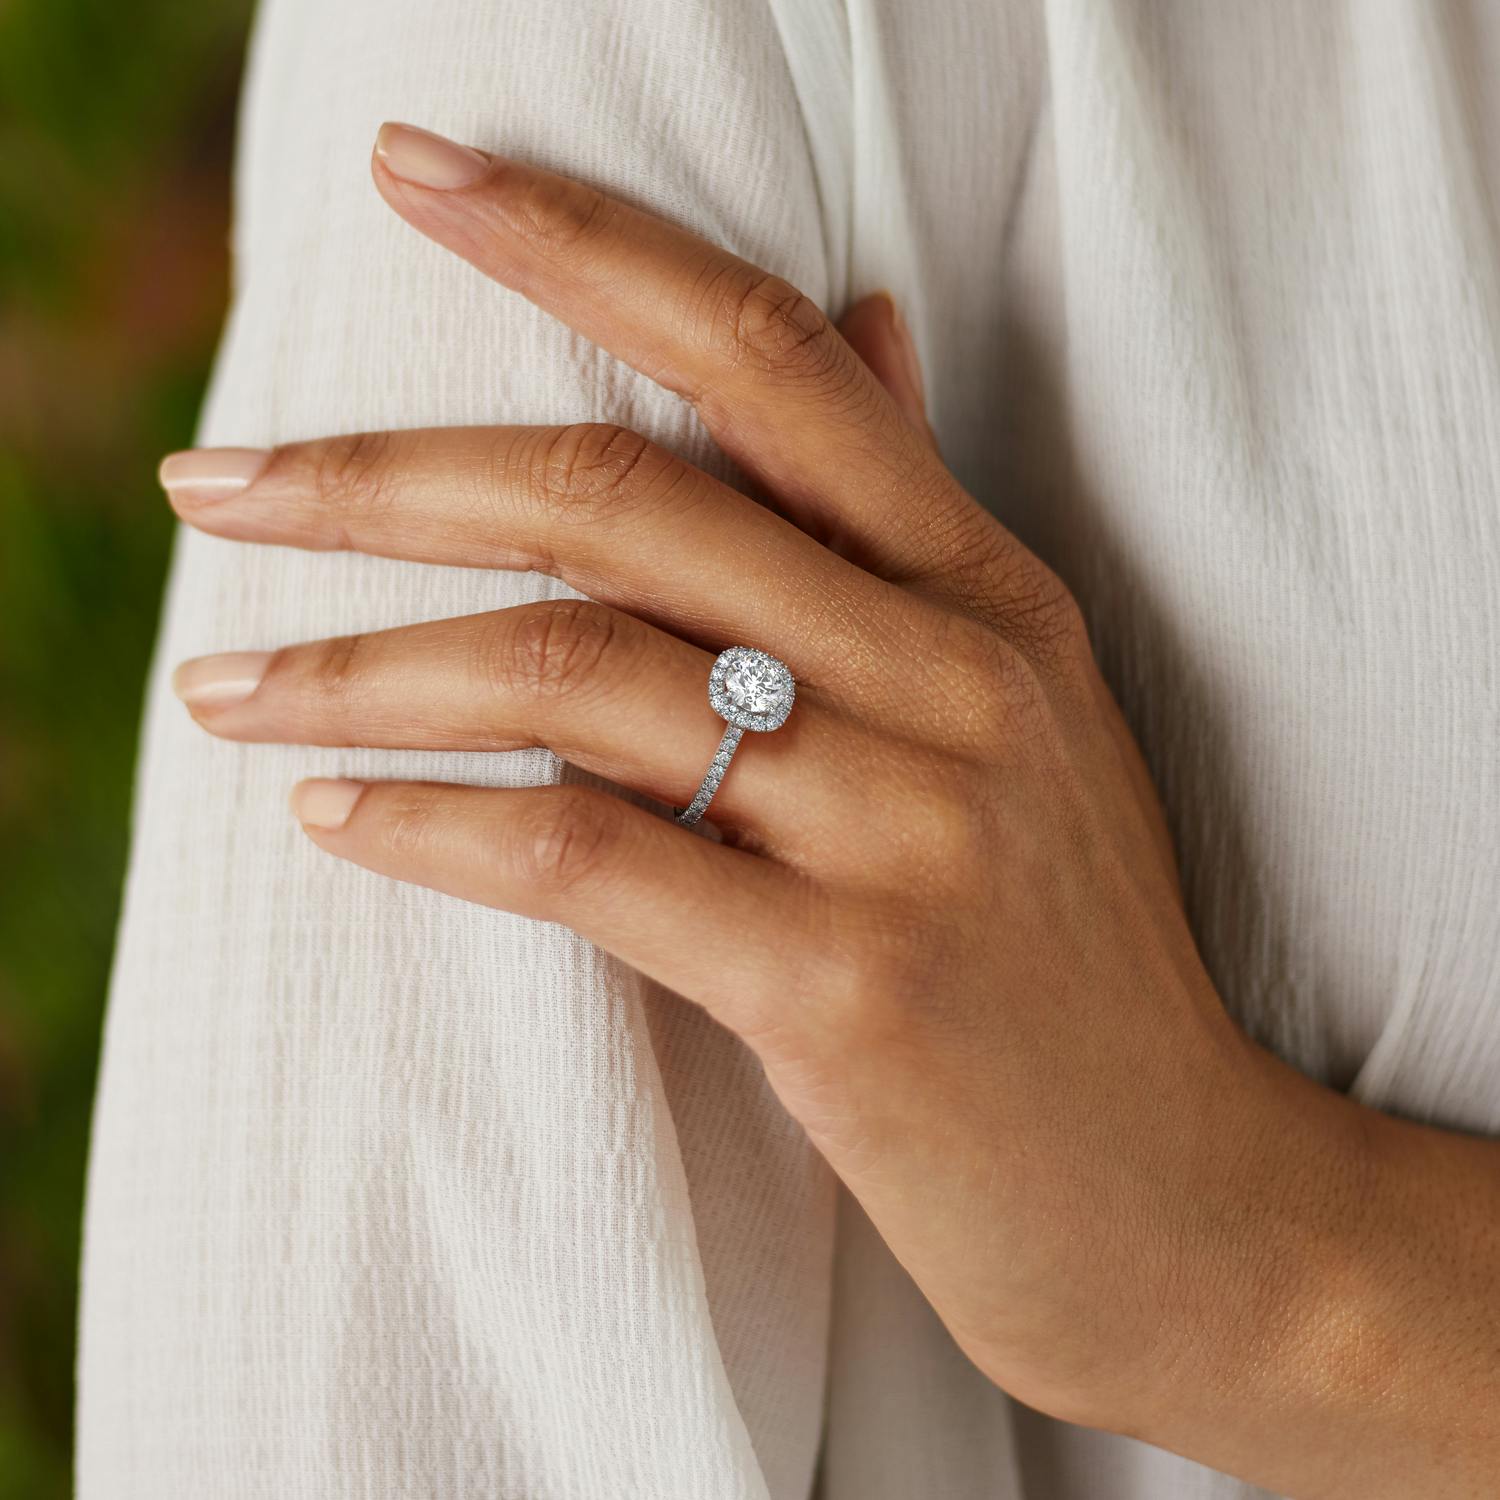 1.5 Carat Diamond Rings: Price And Buying Guide